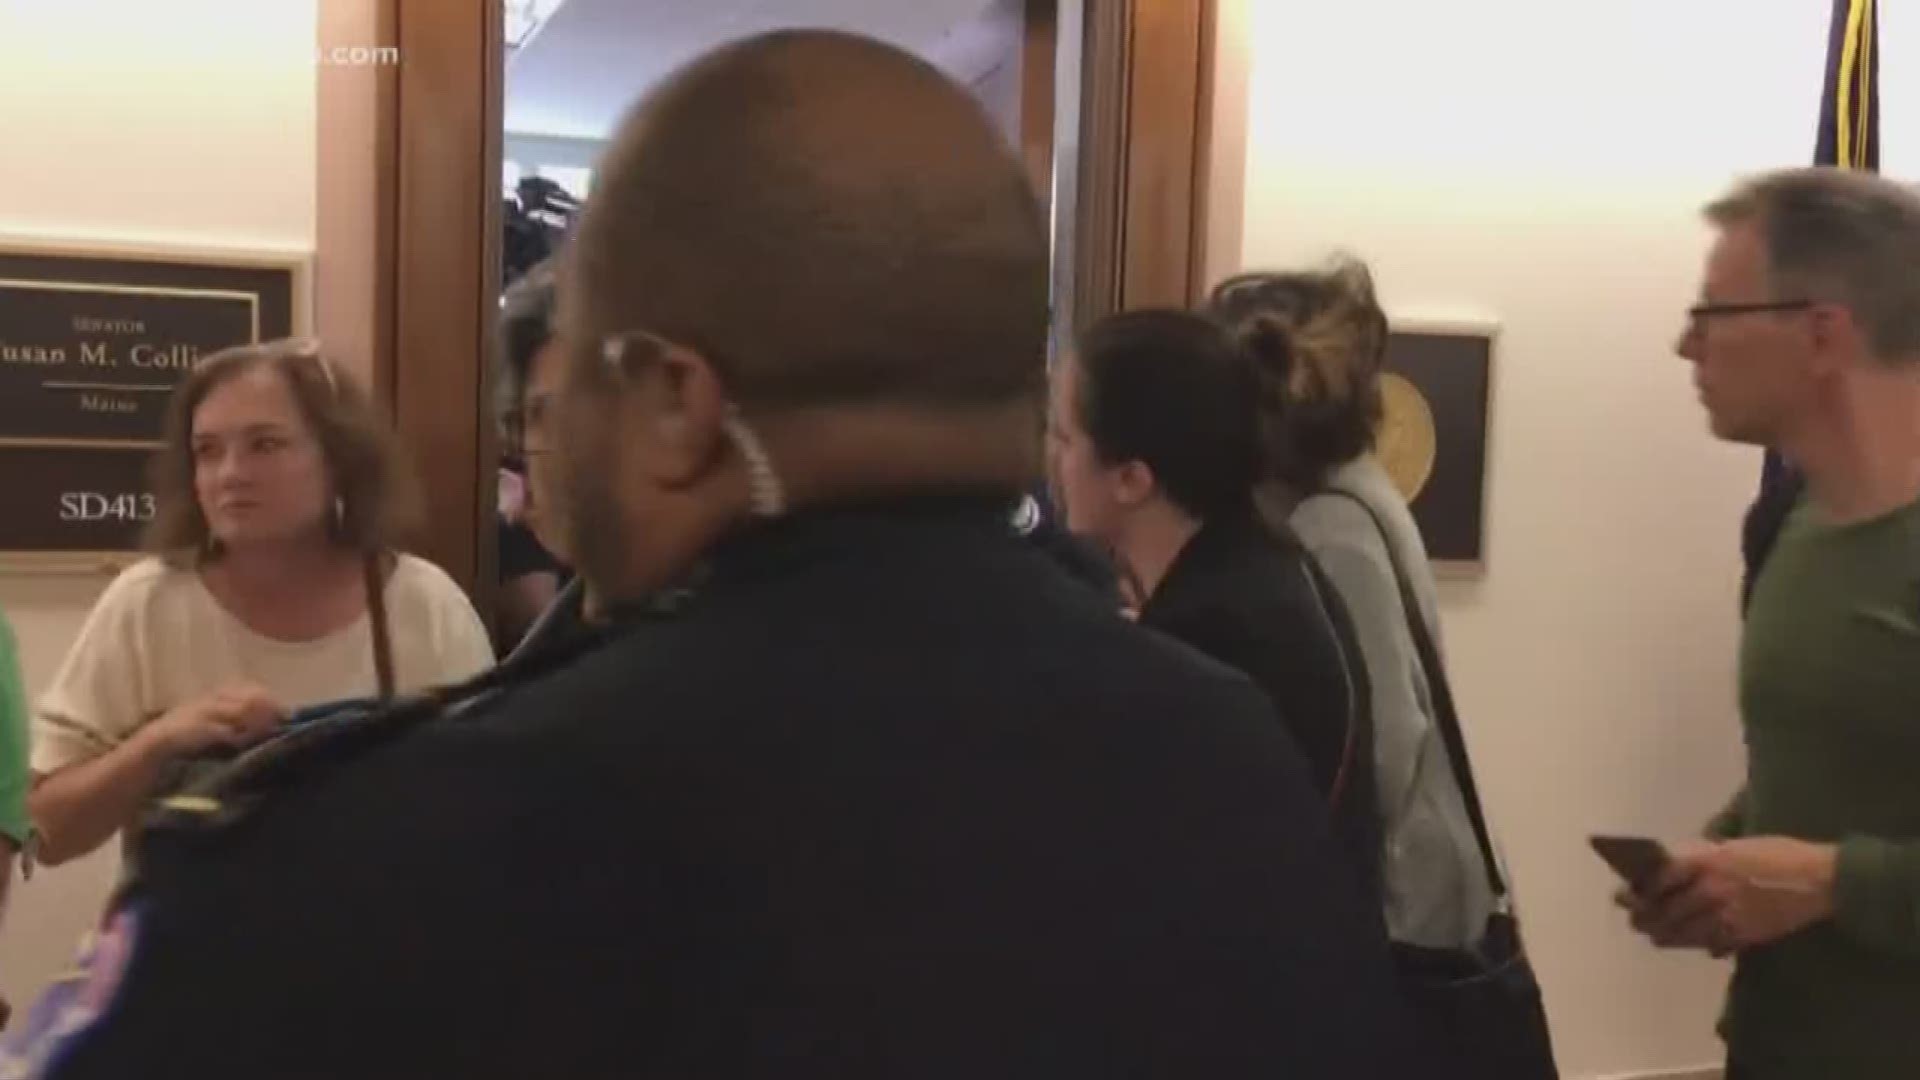 Demonstrators protest outside Collins' office in DC